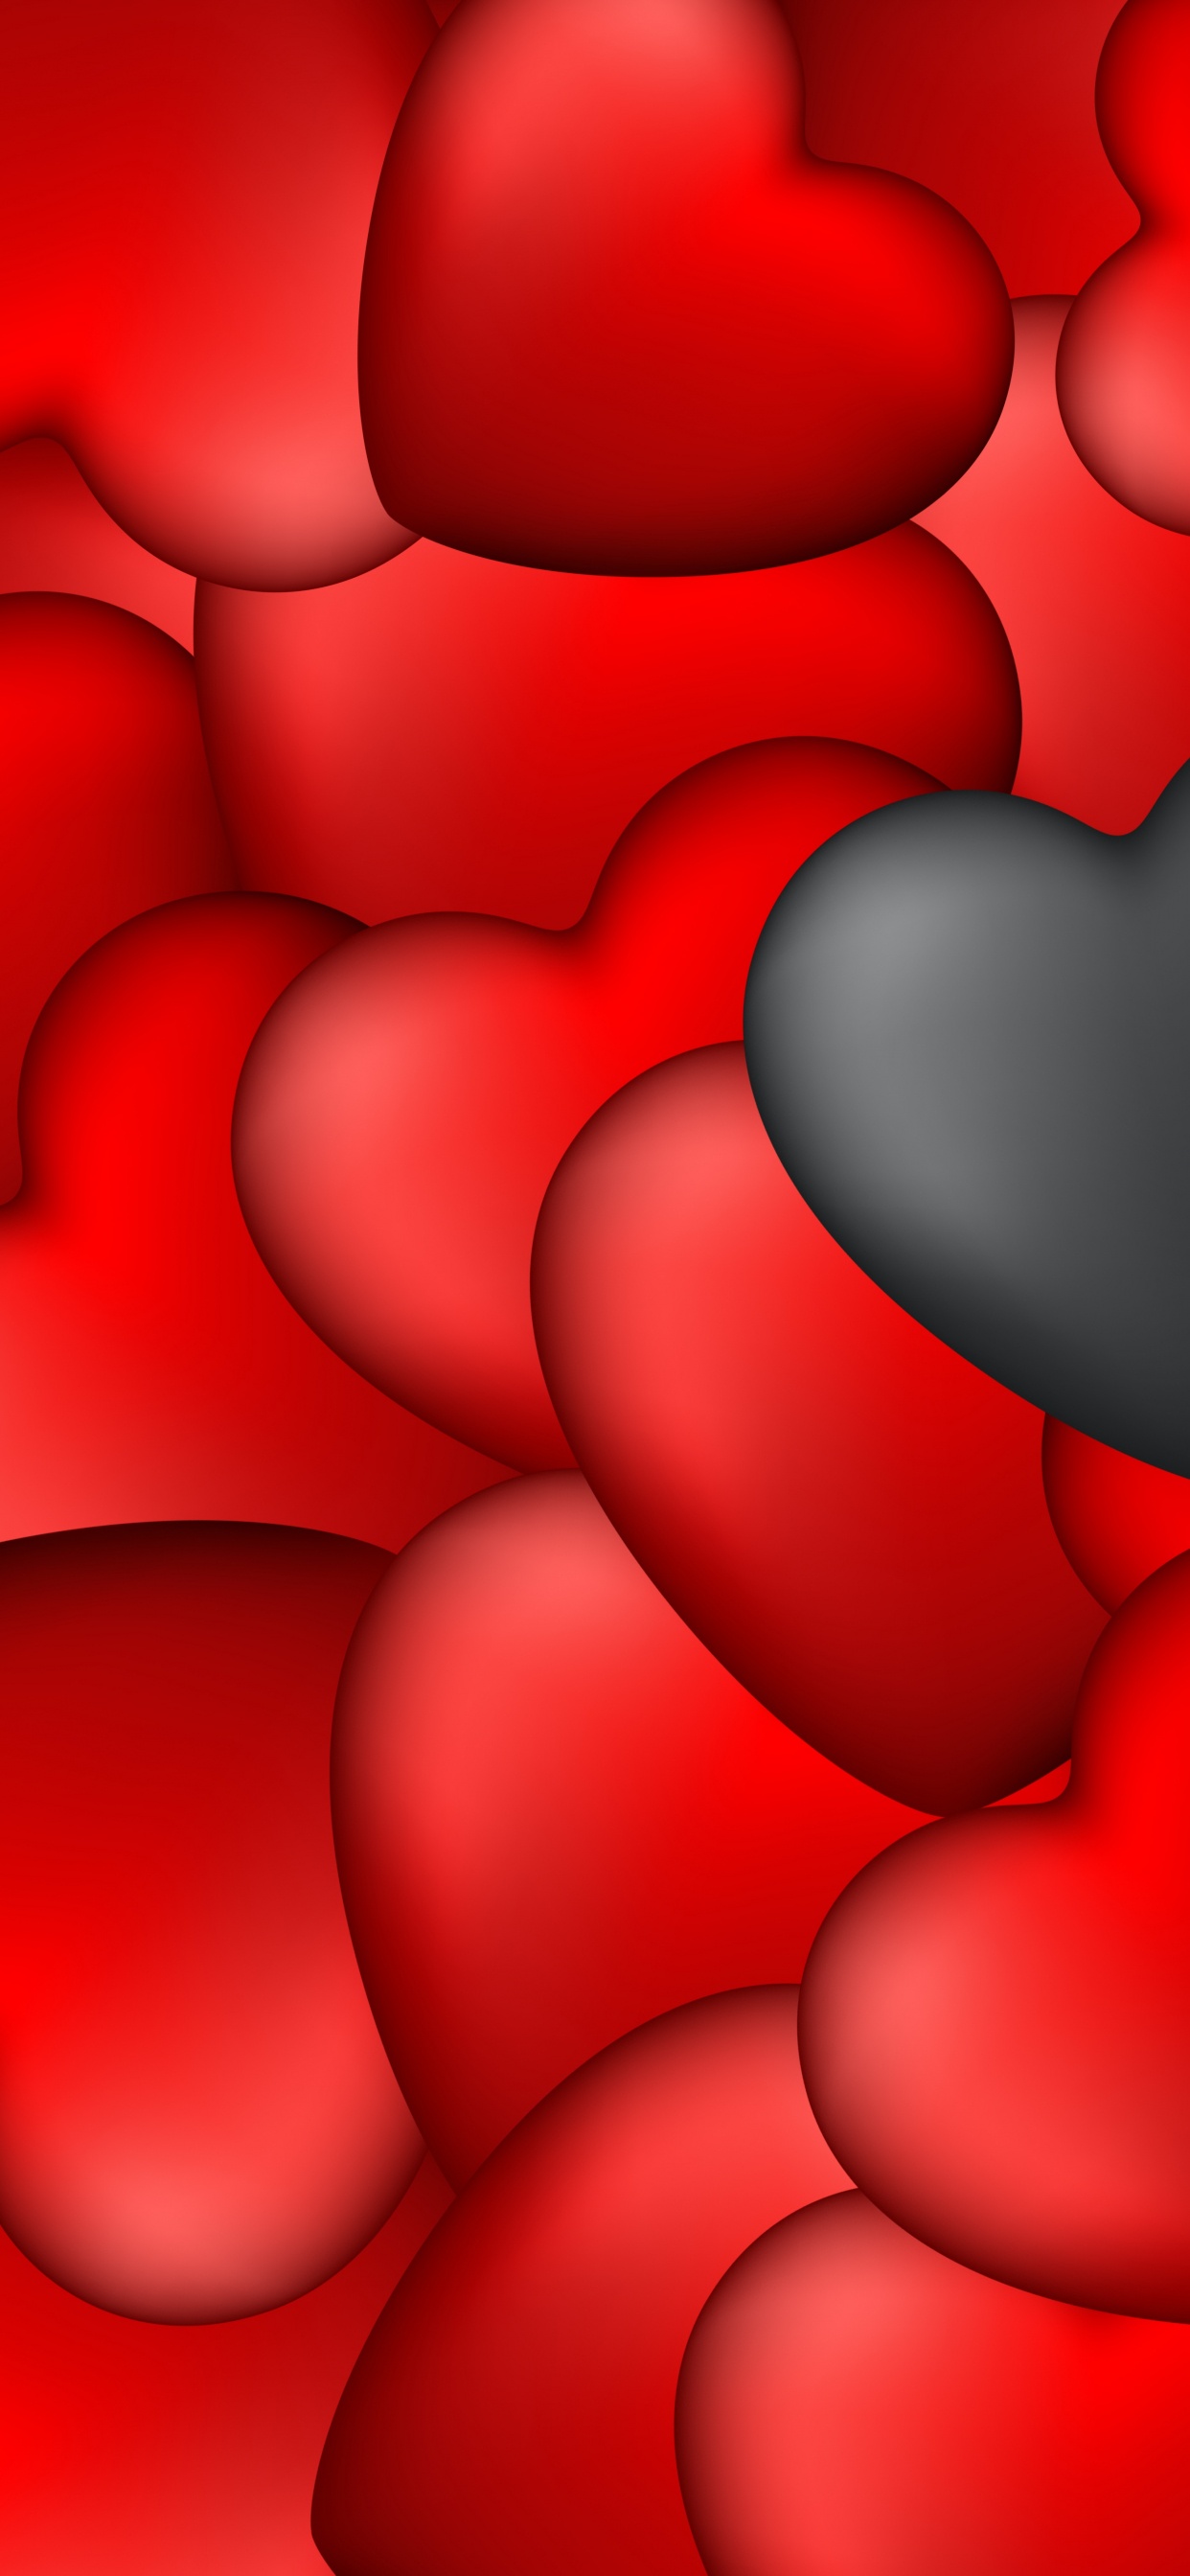 Heart, Black, Red, Valentines Day, Petal. Wallpaper in 1242x2688 Resolution